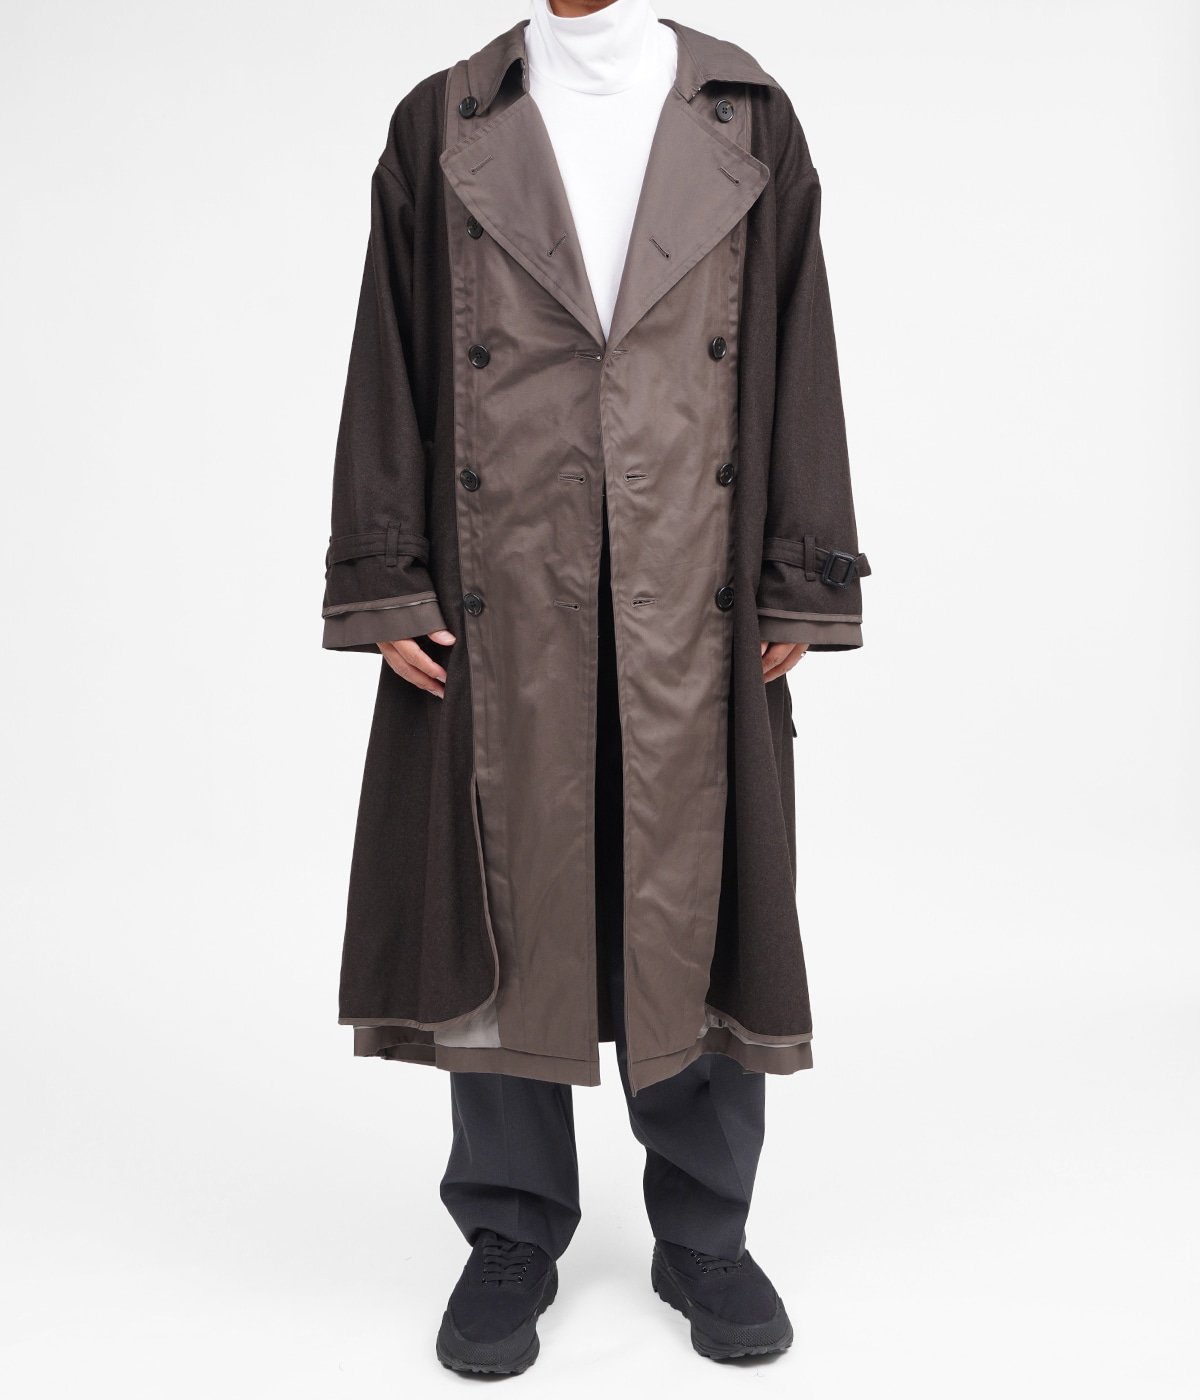 yoke reversible trench coat 20AW SIZE 2 | www.myglobaltax.com